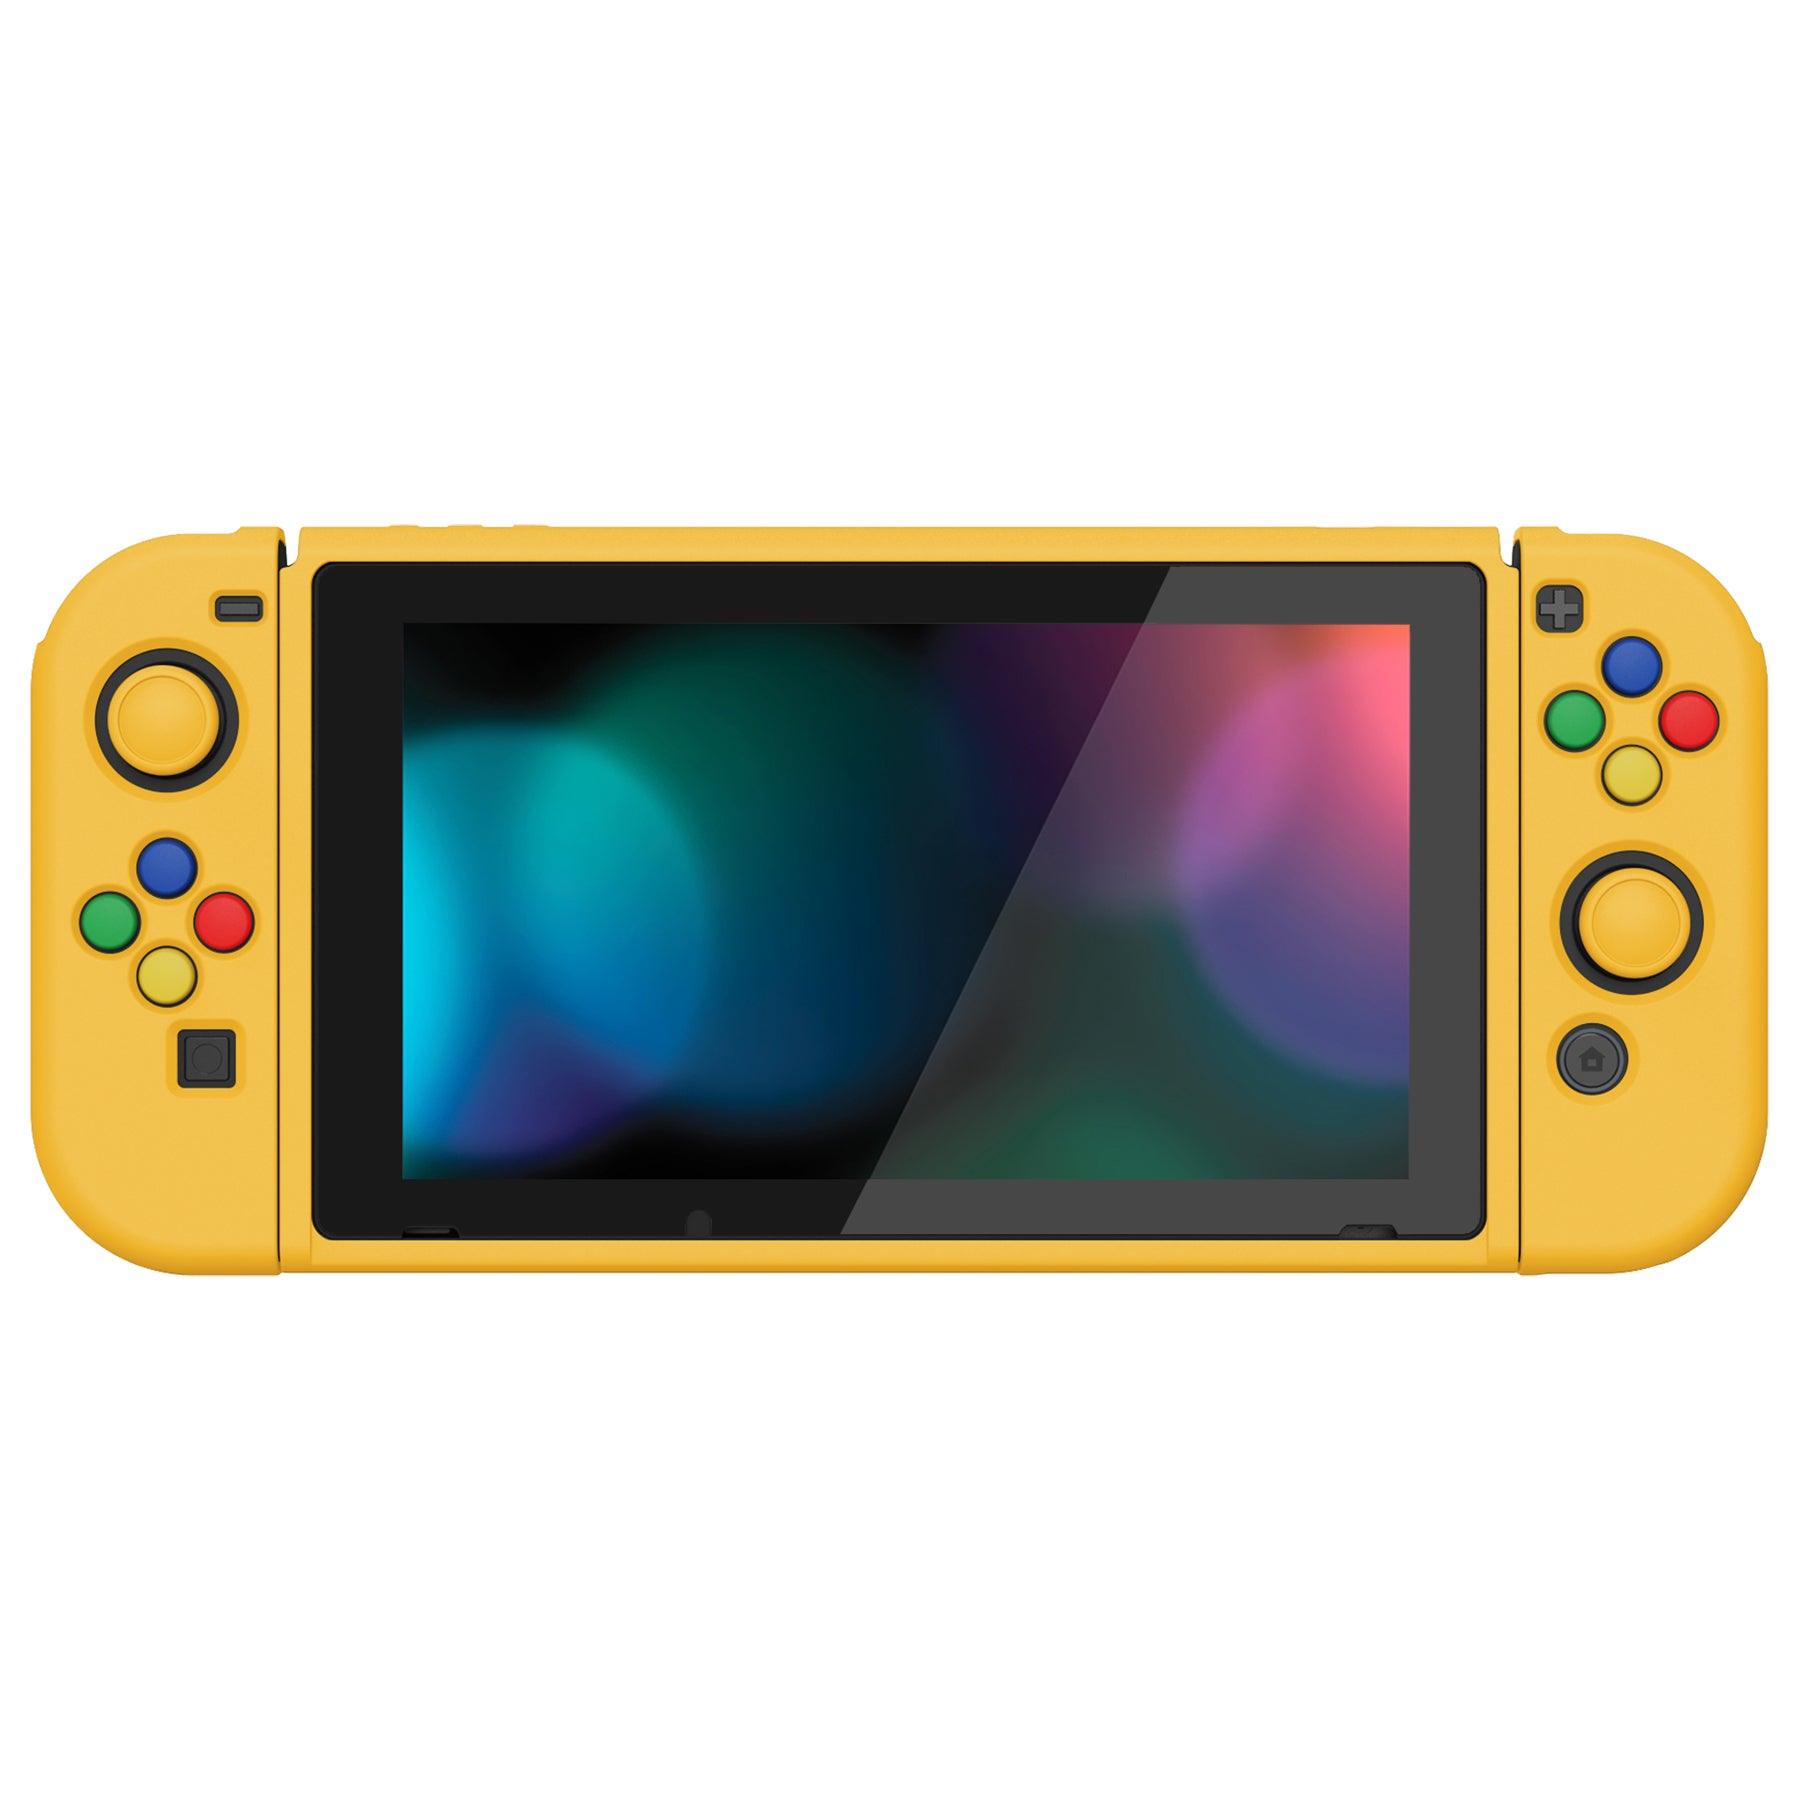 PlayVital ZealProtect Soft Protective Case for Nintendo Switch, Flexible Cover for Switch with Tempered Glass Screen Protector & Thumb Grips & ABXY Direction Button Caps - Bright Yellow - RNSYM5009 playvital